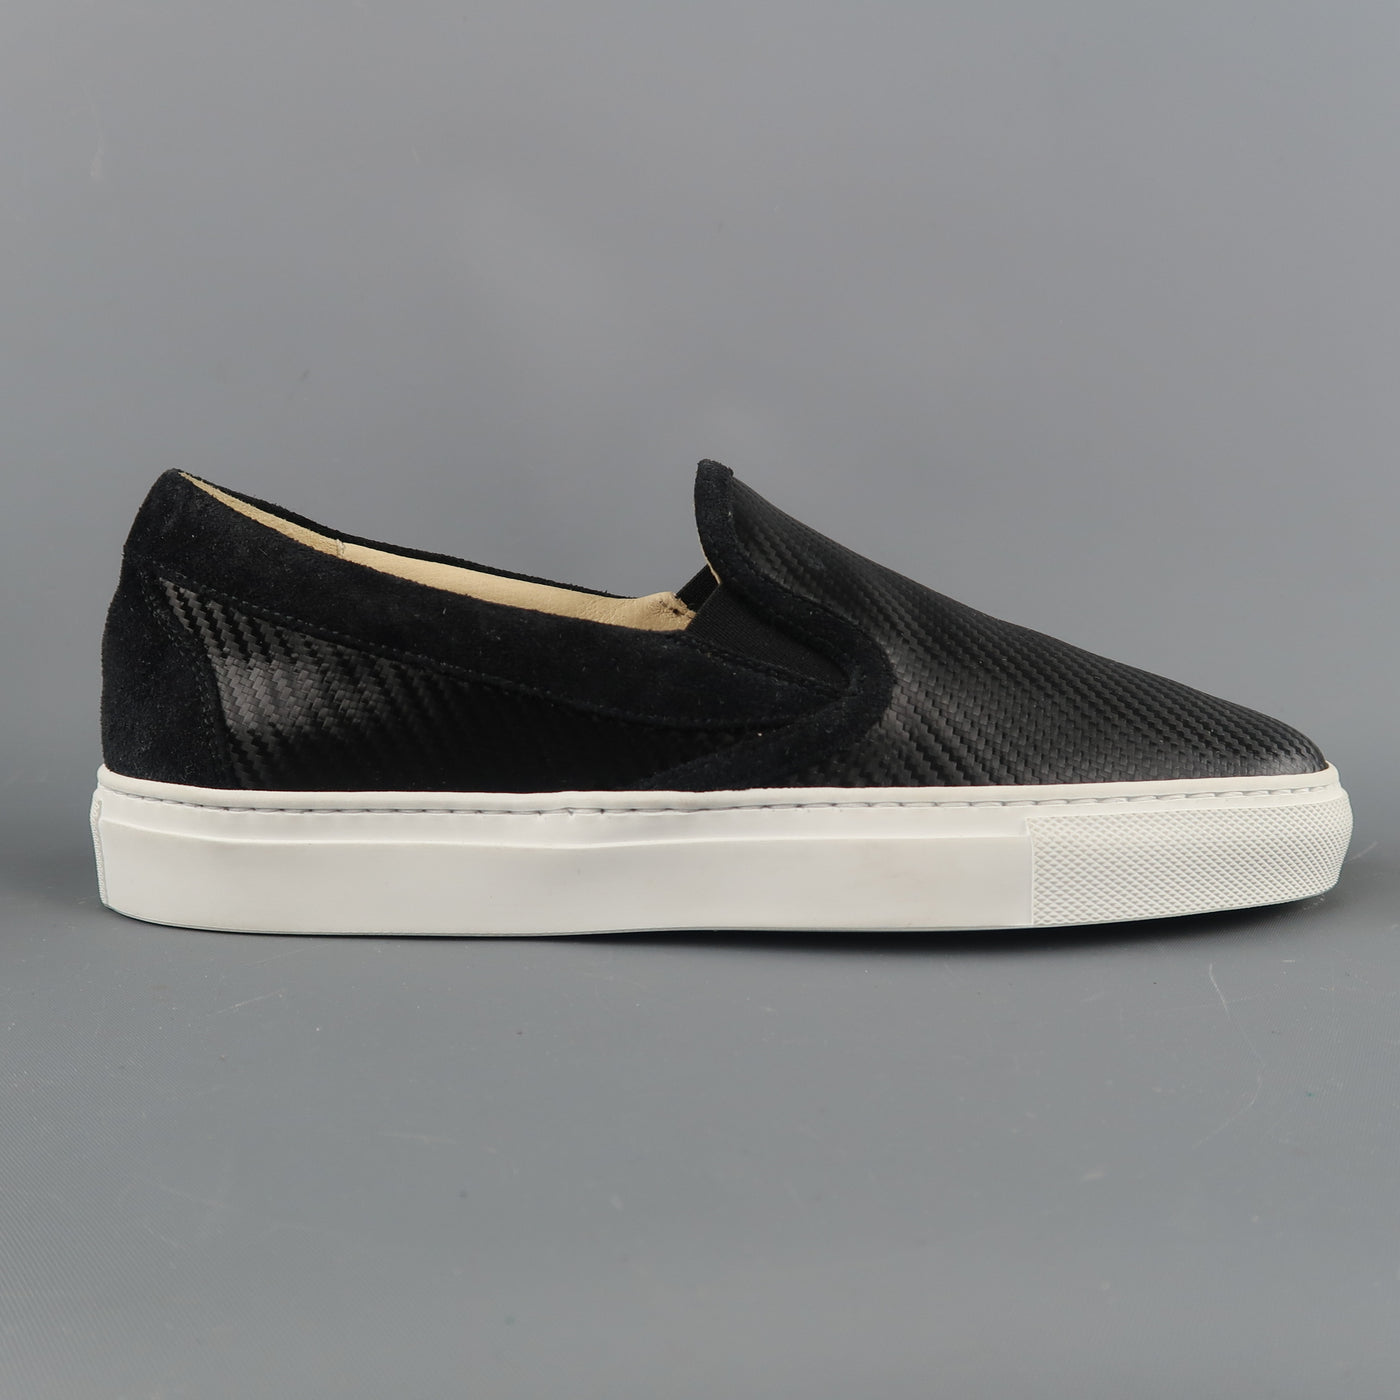 BARNEY'S NEW YORK Size 6 Black Textured Rubber & Suede Slip On Sneakers